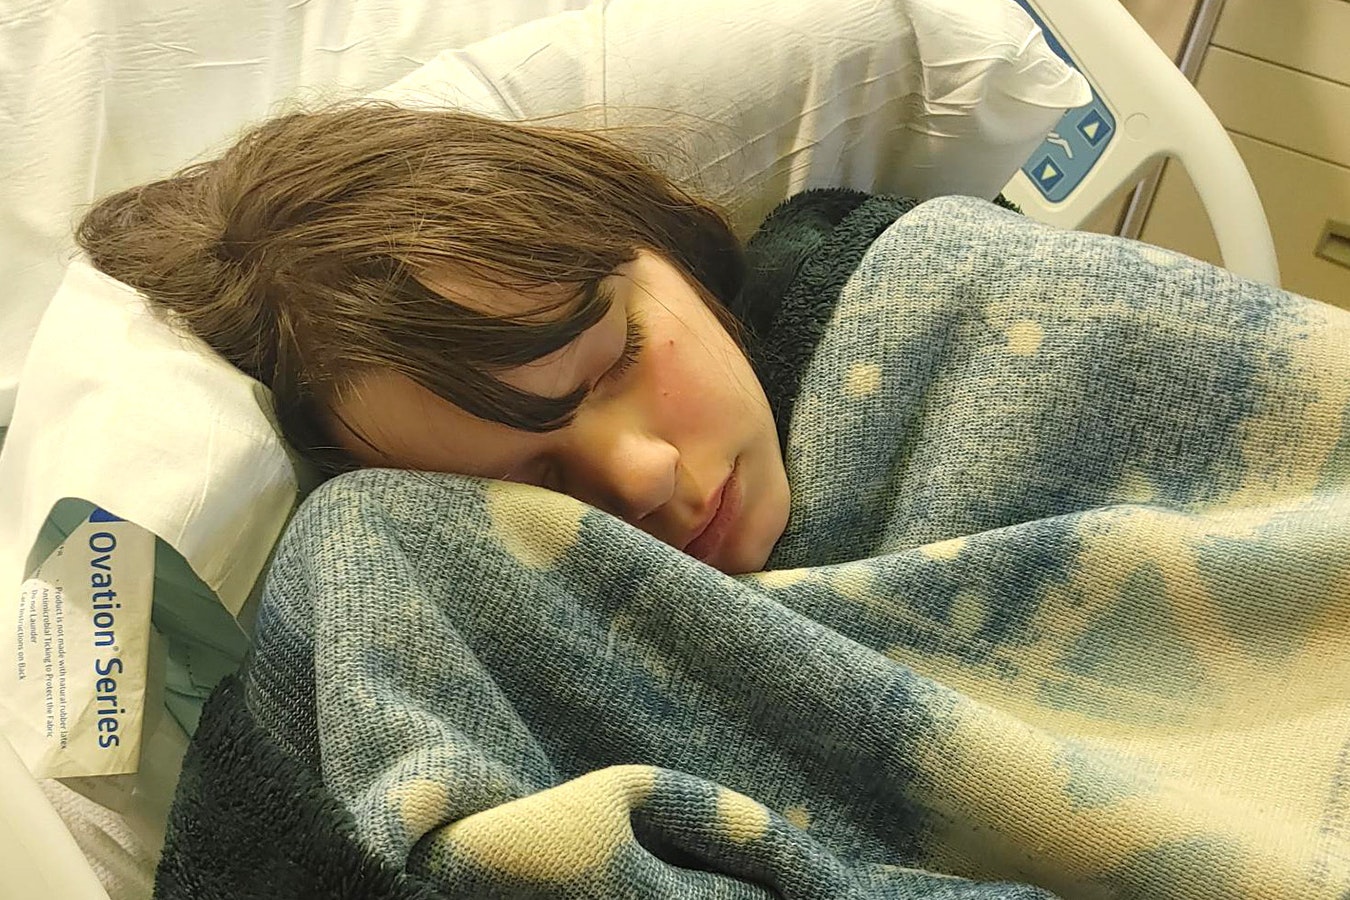 Talyn Reimer, 10, of Rawlins rests in a Denver hospital after being diagnosed with a large tumor in his head.